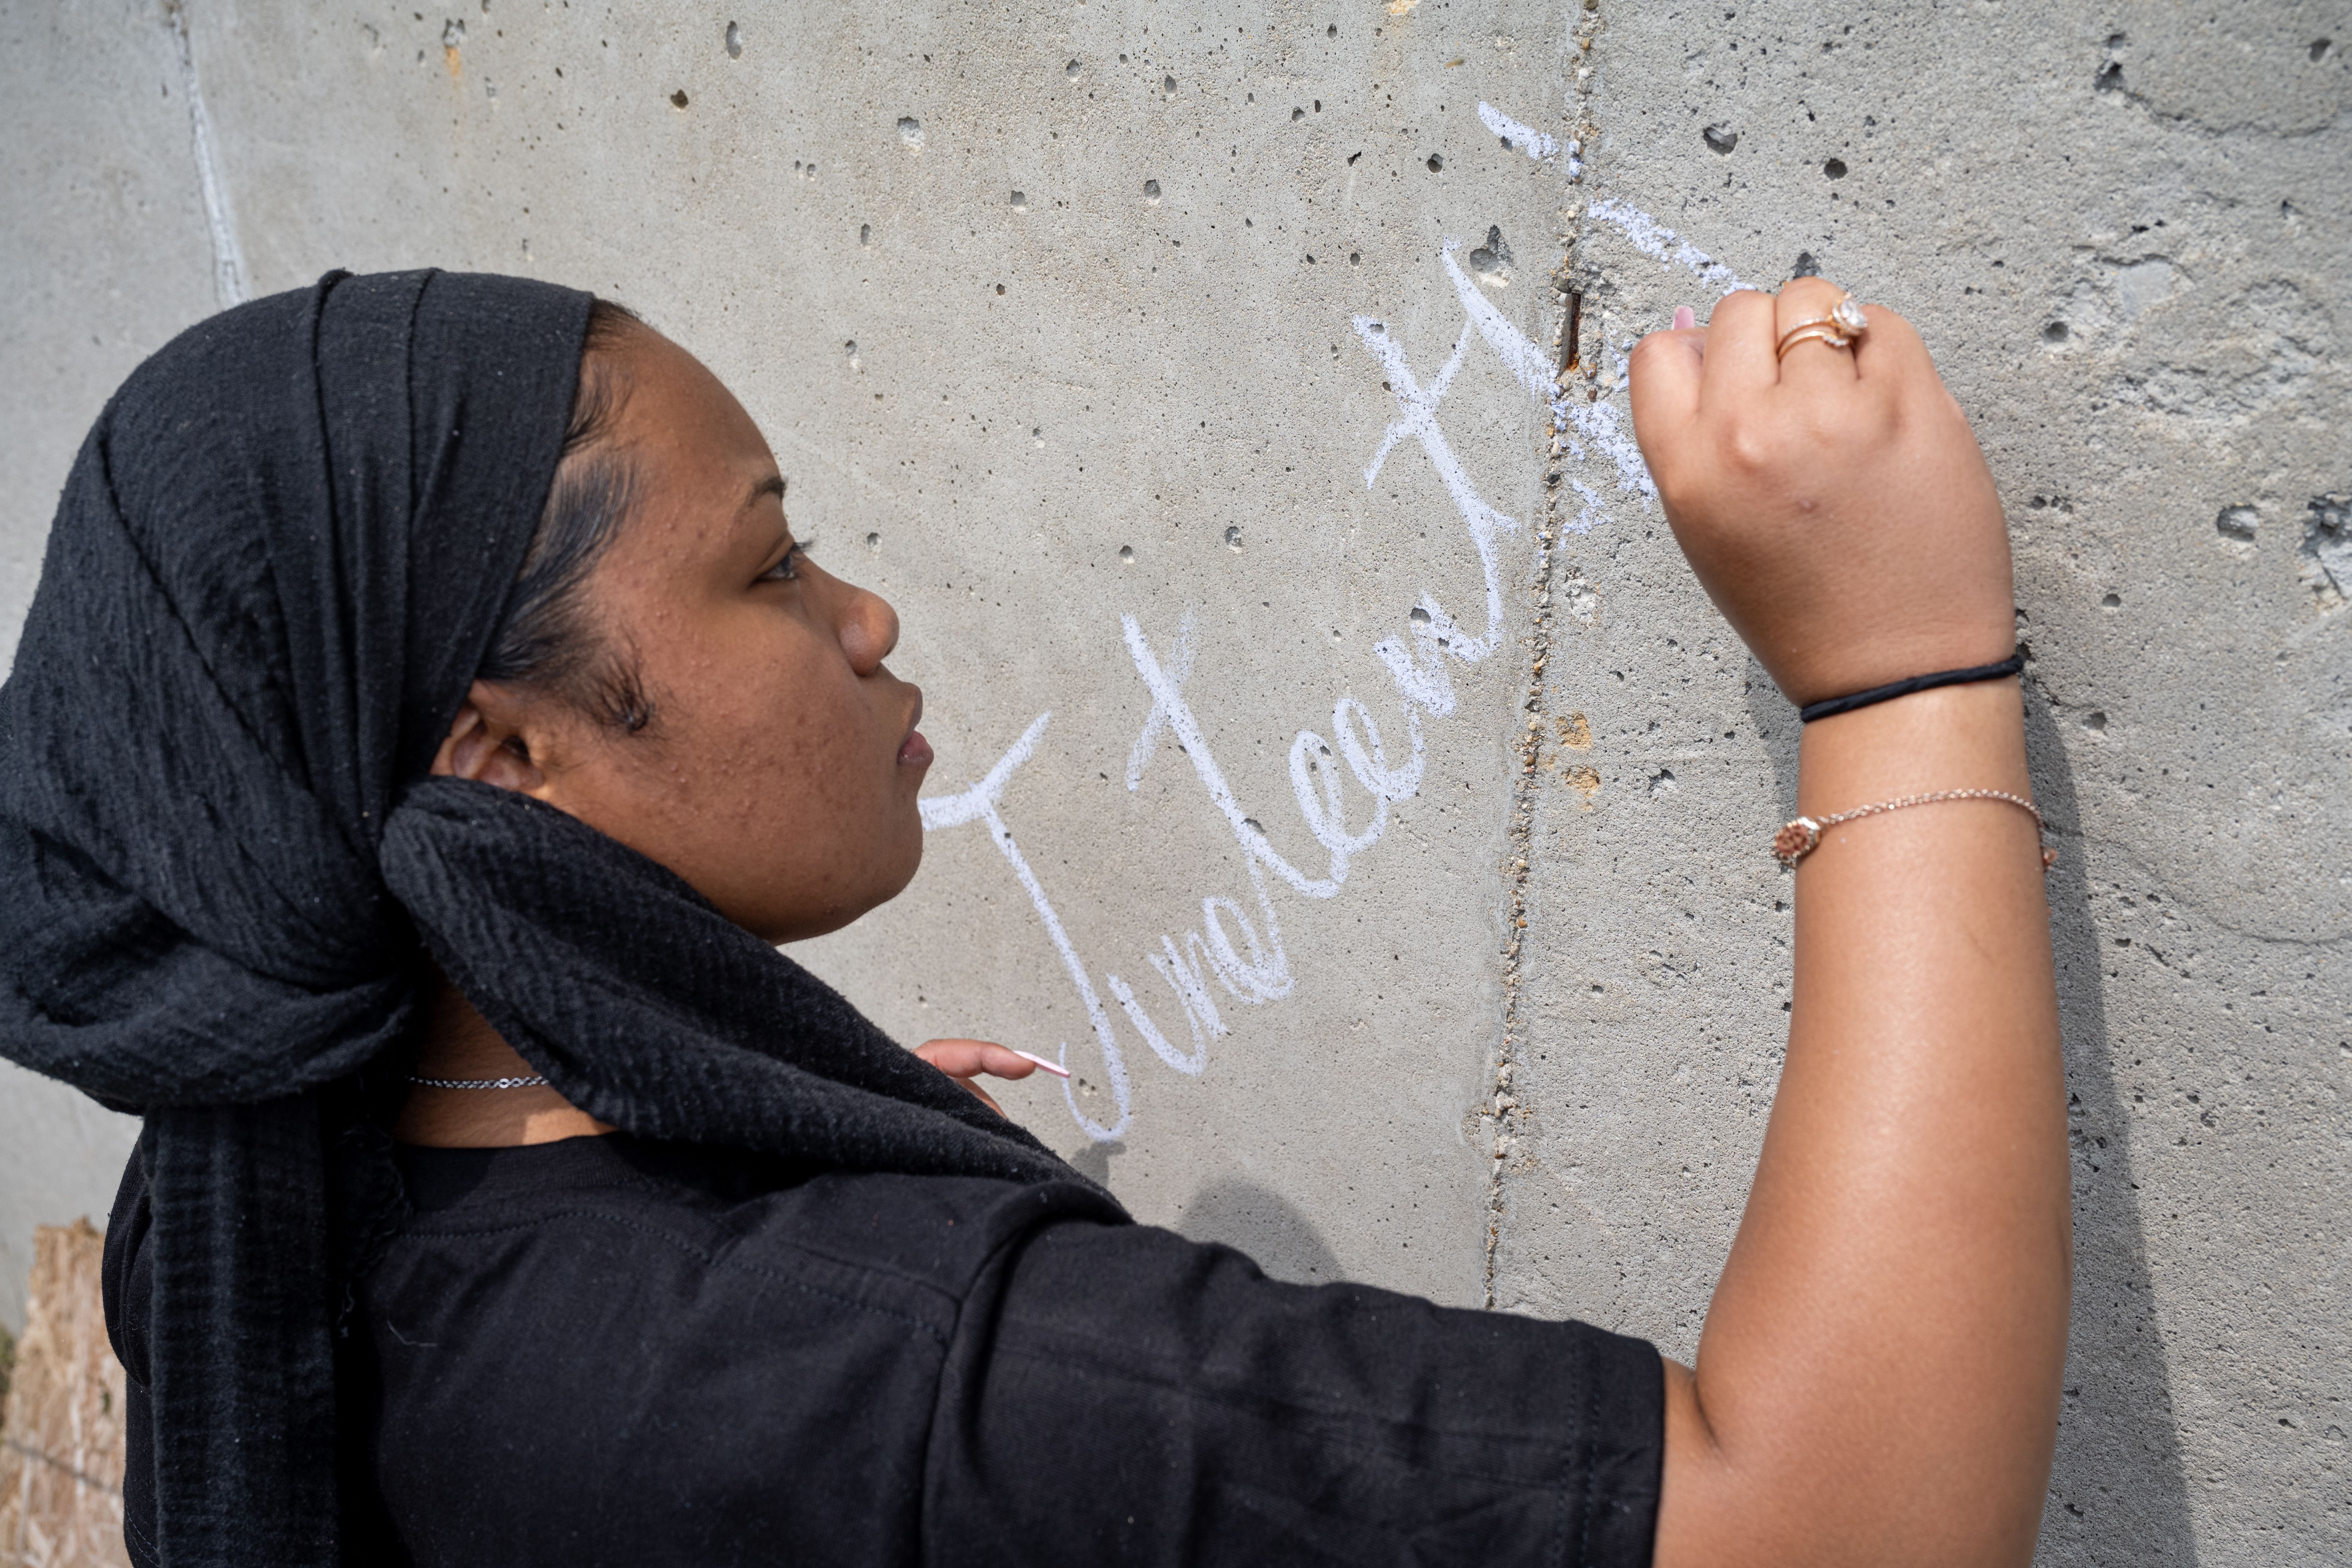 Photo of a young person writing "Juneteenth" on a wall with chalk